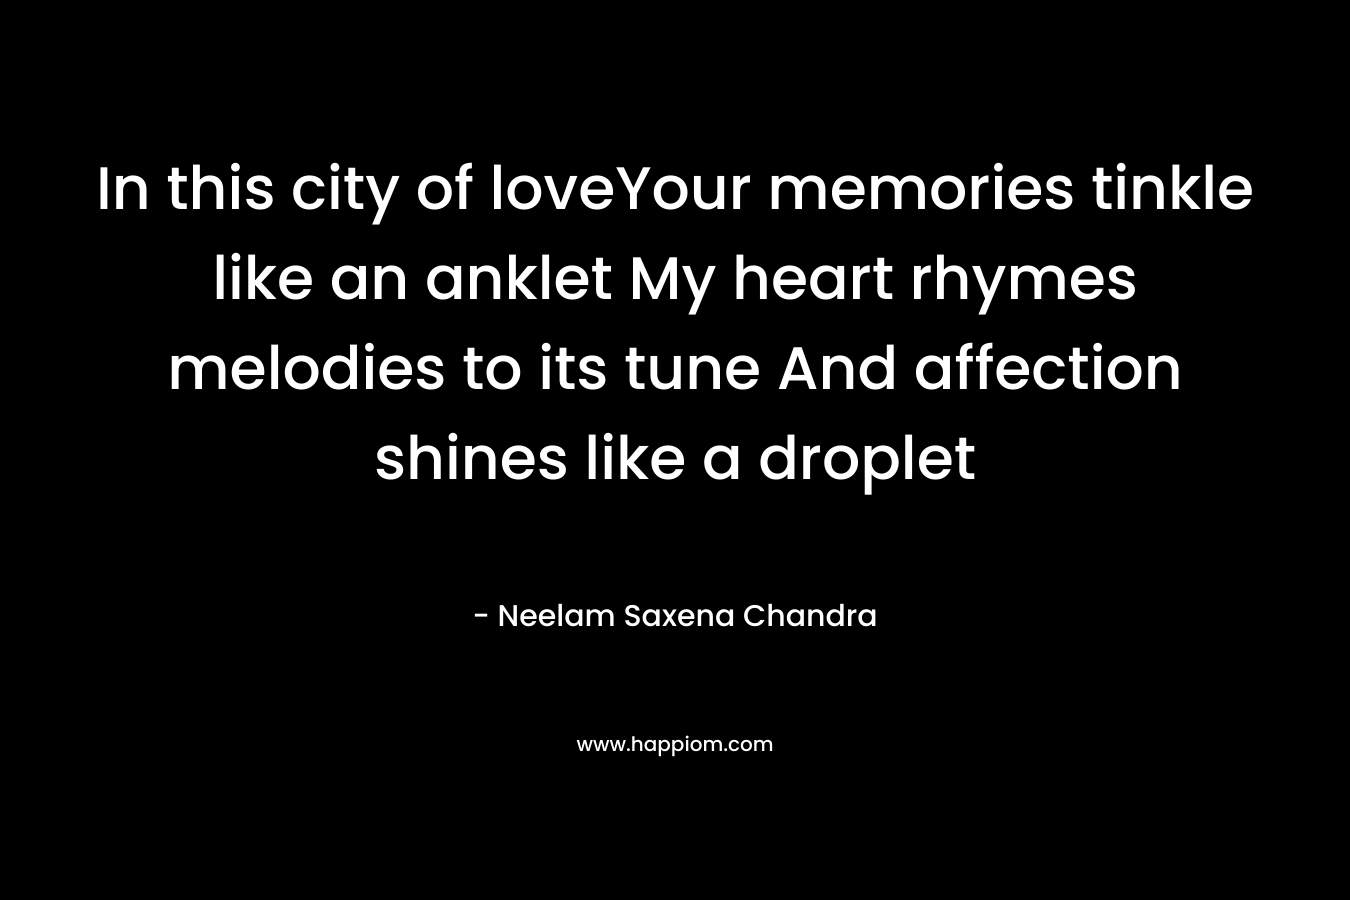 In this city of loveYour memories tinkle like an anklet My heart rhymes melodies to its tune And affection shines like a droplet – Neelam Saxena Chandra